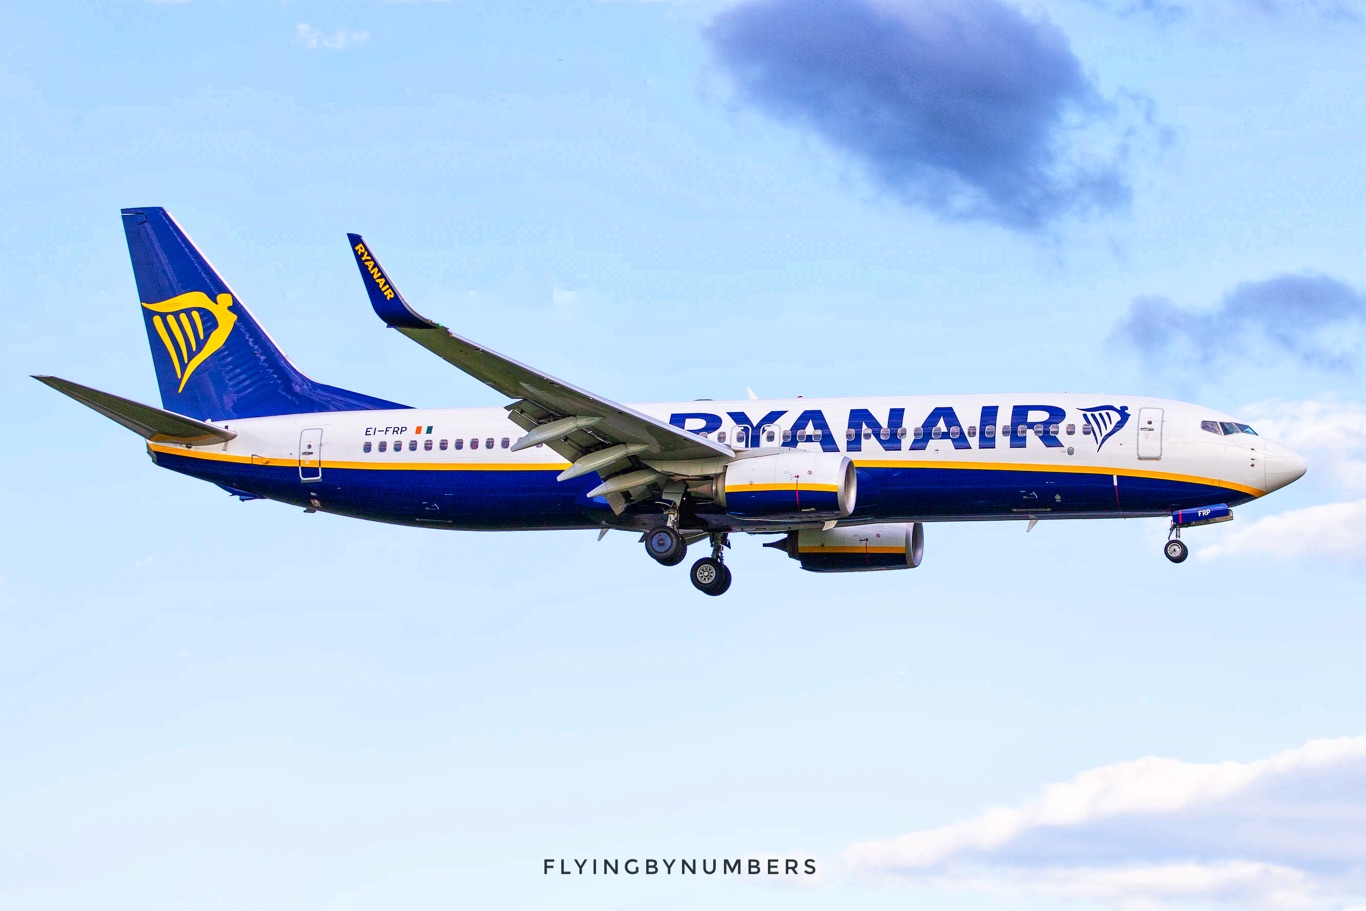 Shorthaul pilots on a fixed pattern roster flying for Ryanair